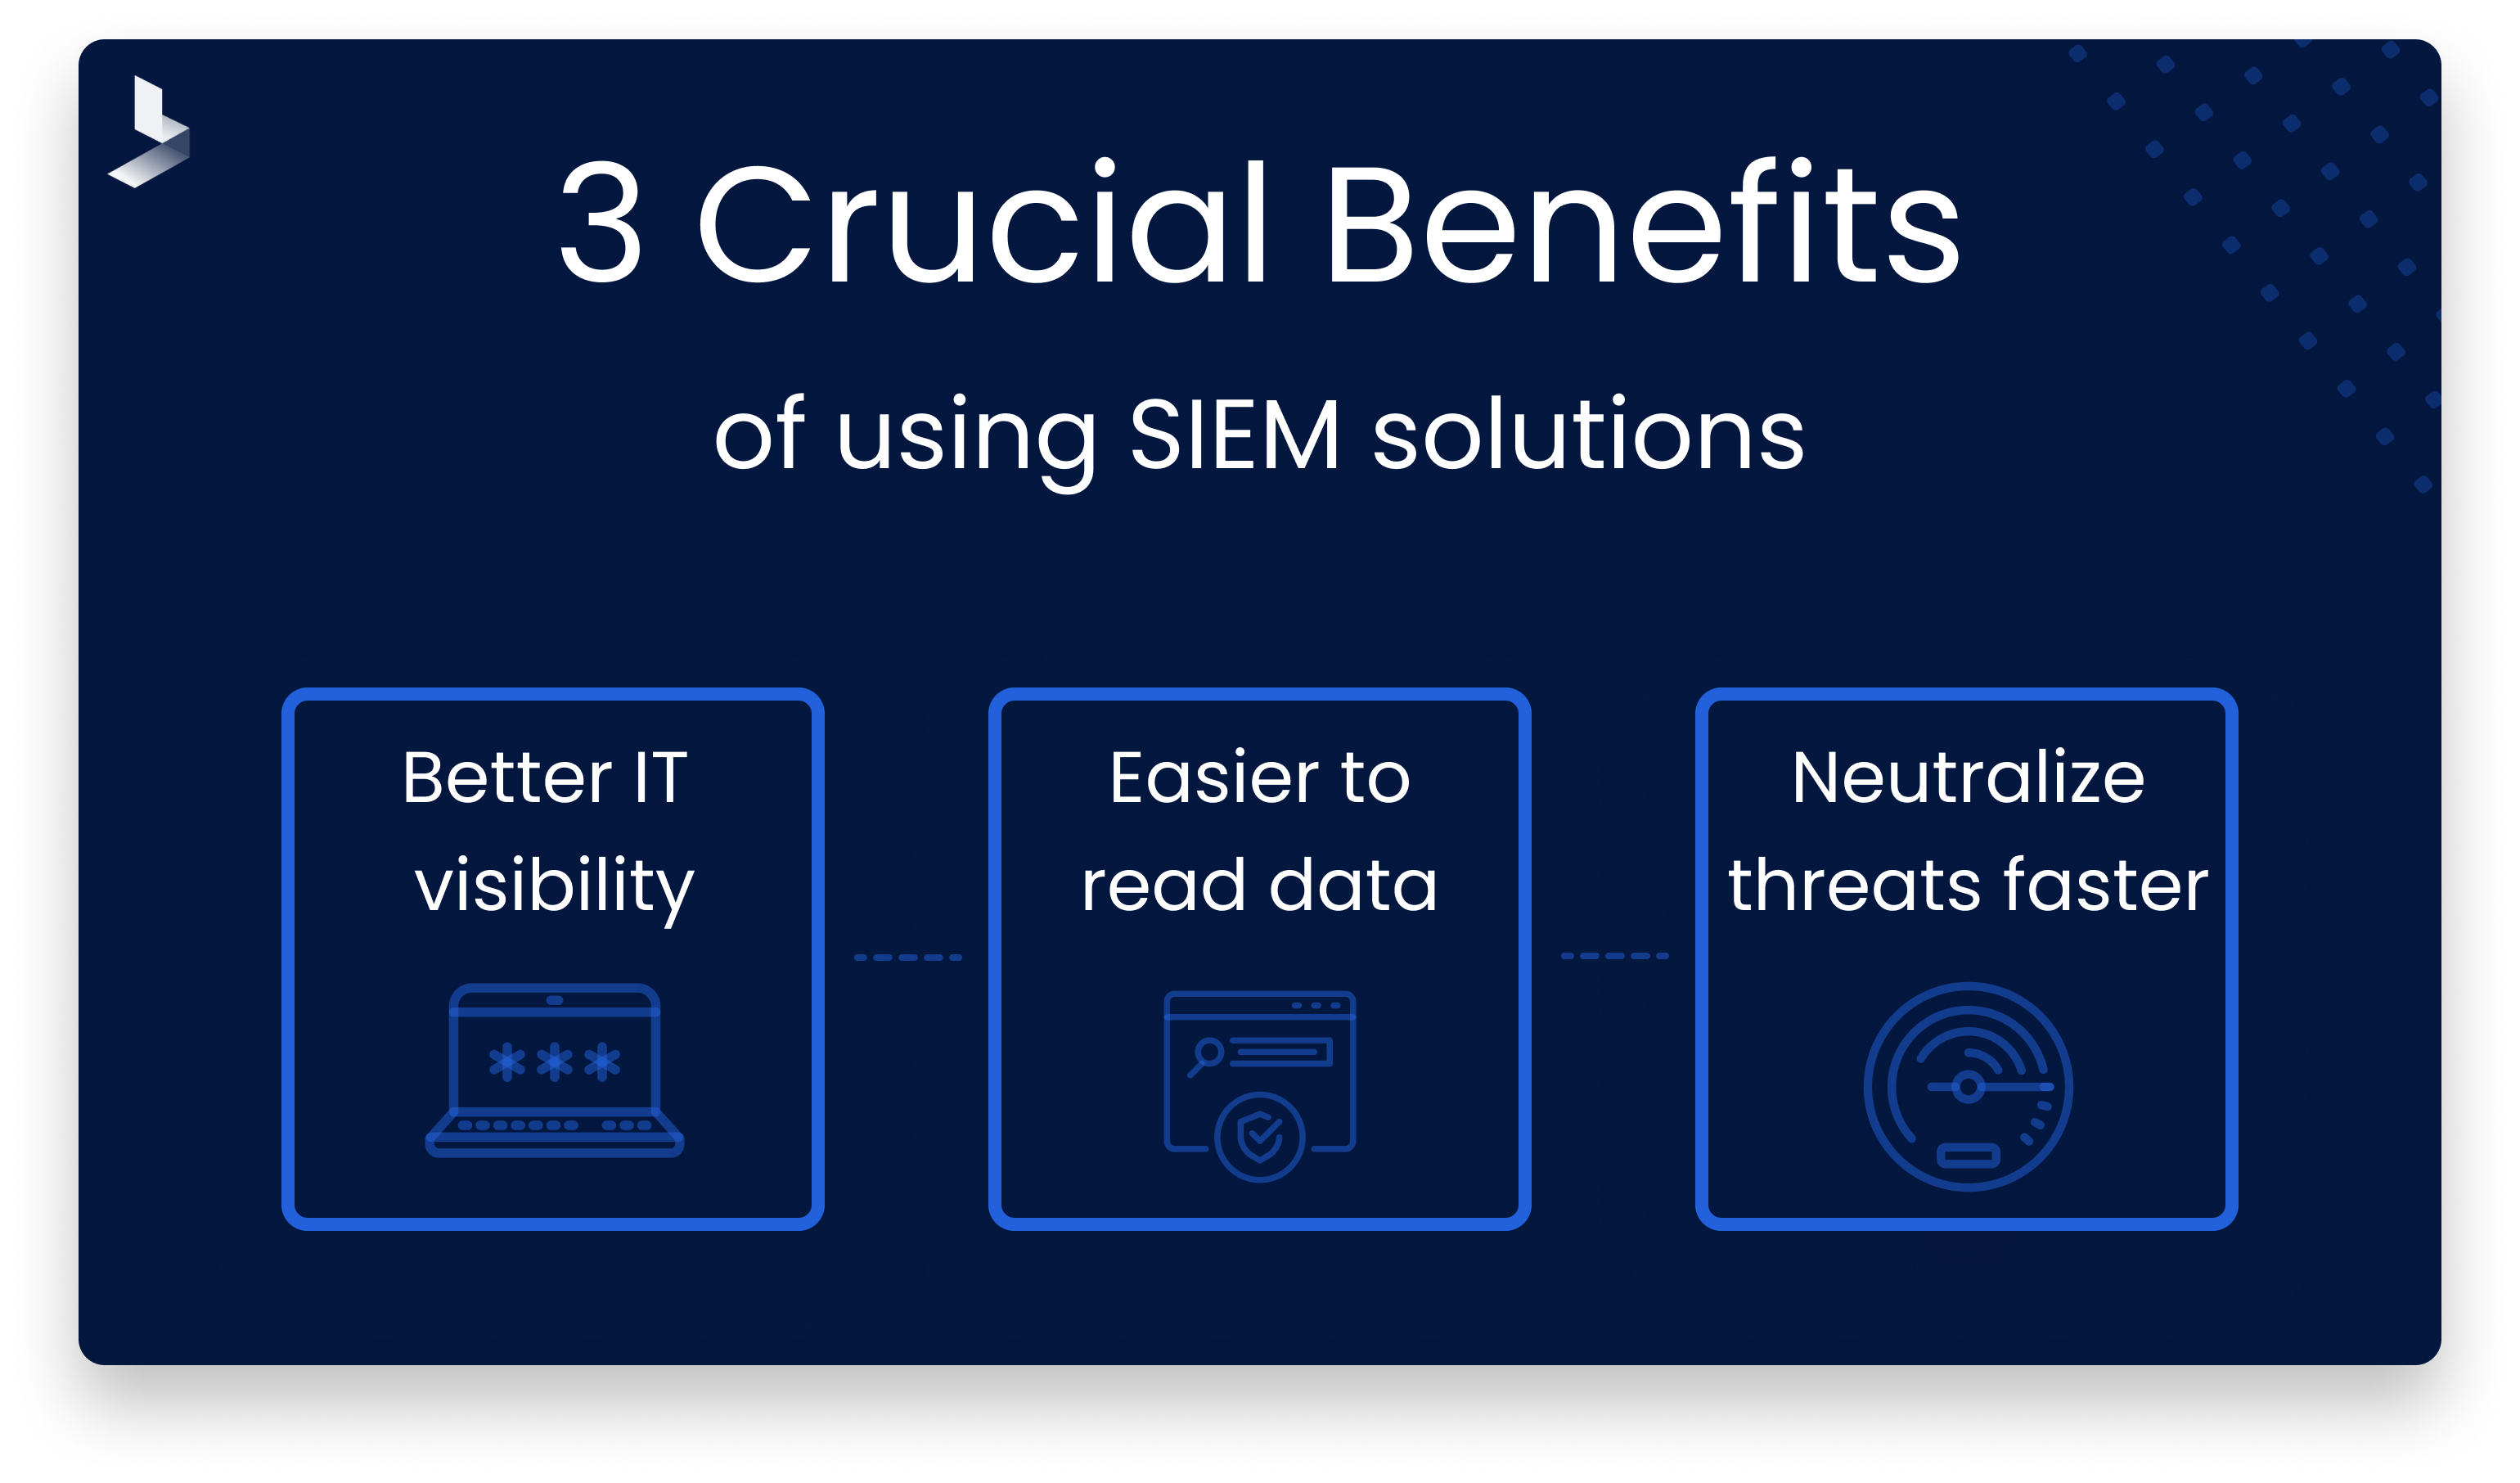 3_Crucial_Benefits_of_using_SIEM_solutions-1